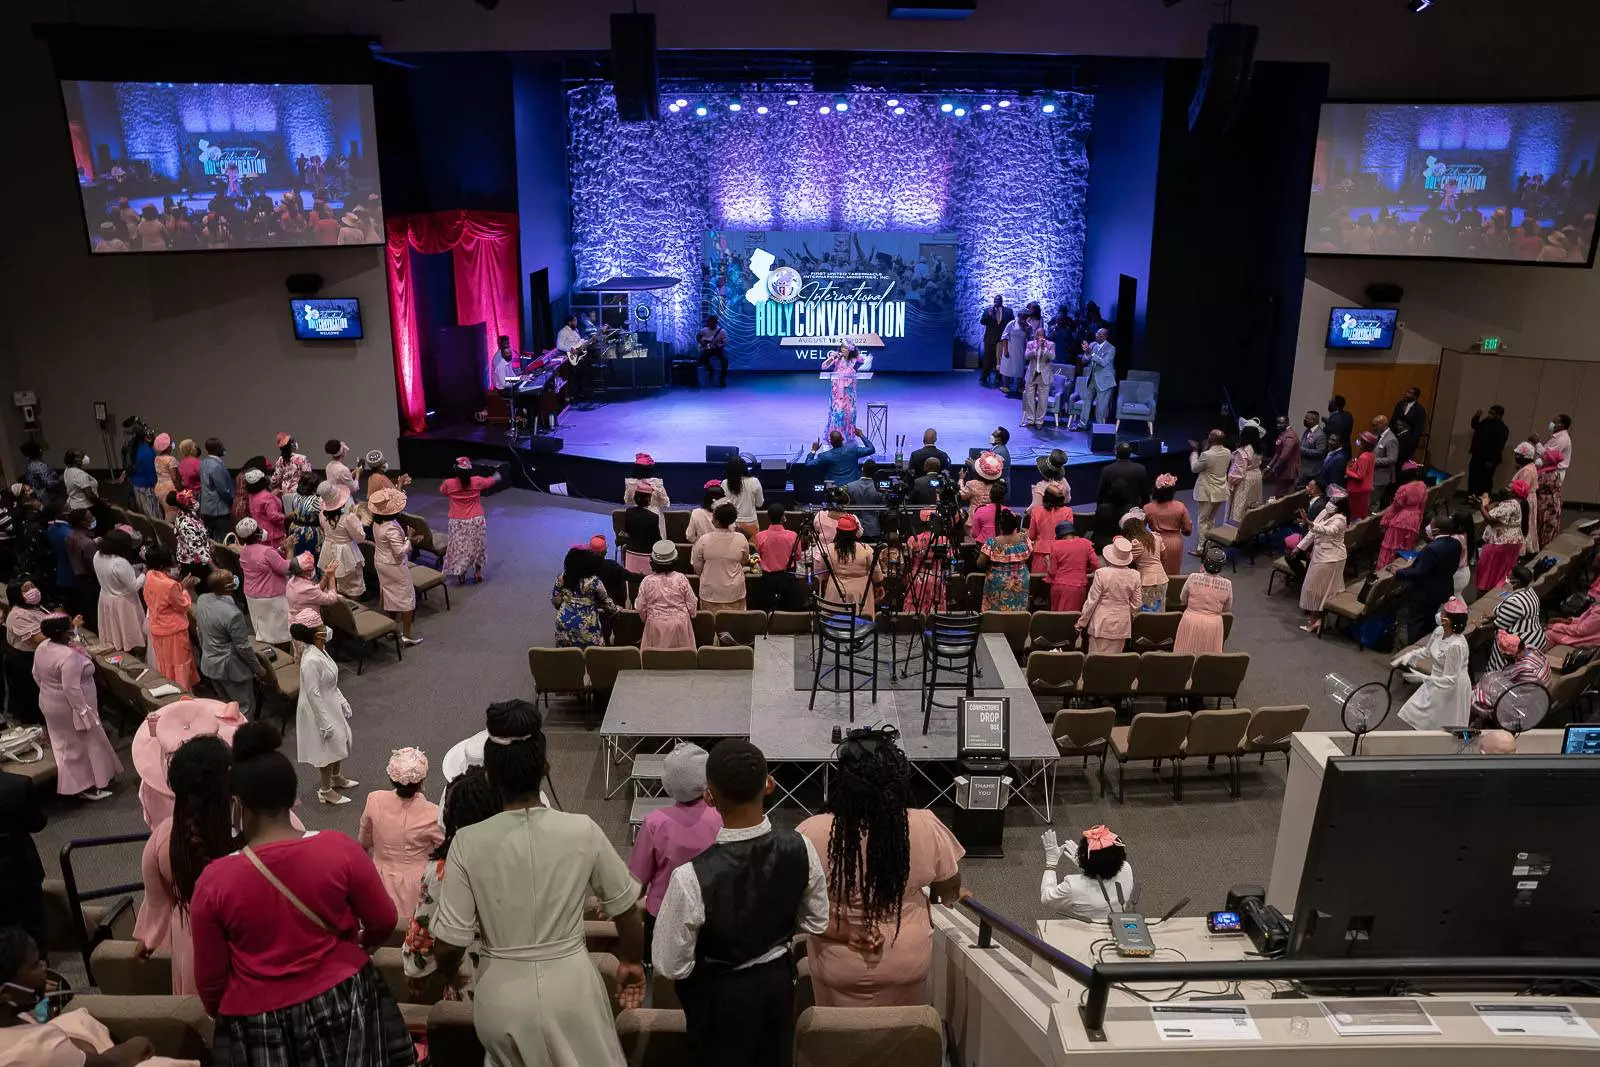 Apostolic church gathering with a large group of people in pink robes.